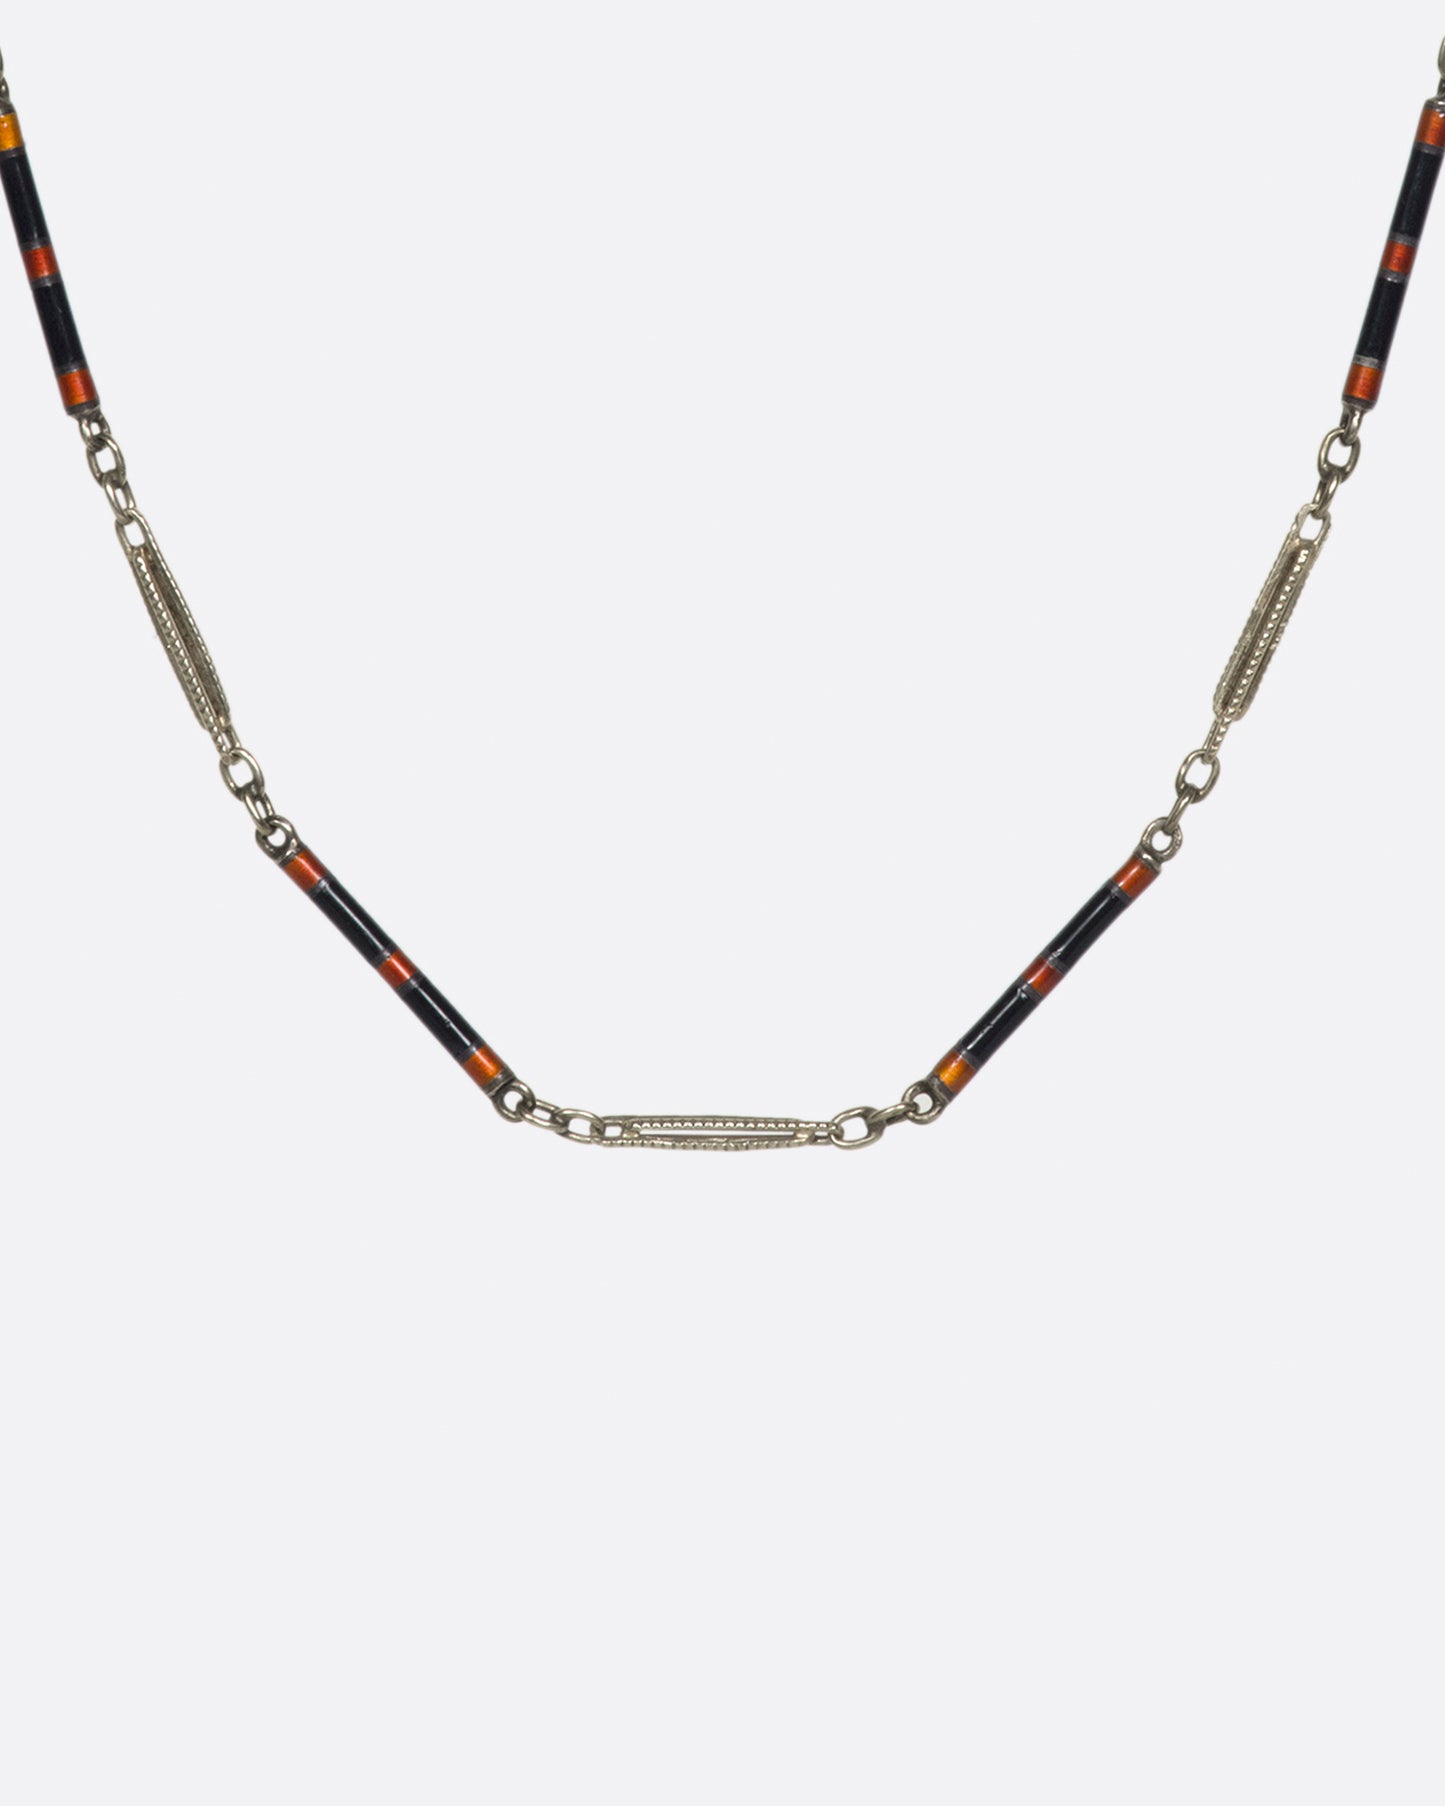 A vintage white gold bar-link chain necklace dotted with red and black enamel—a subtle pop of color for someone with a minimalist sensibility.